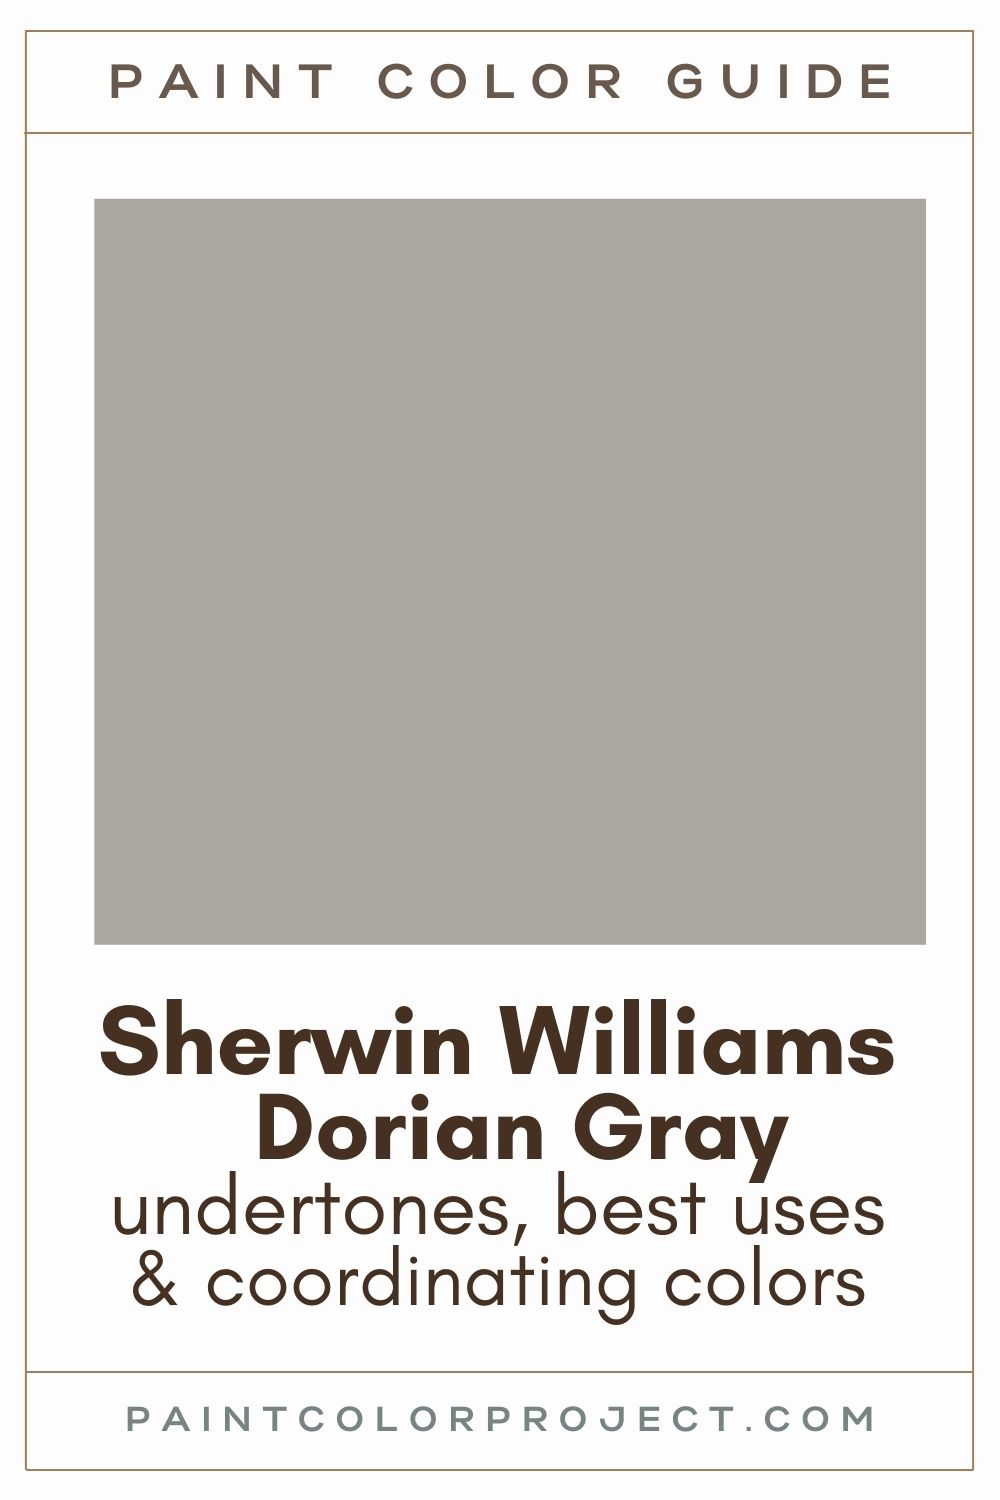 Sherwin Williams Dorian Gray paint color guide